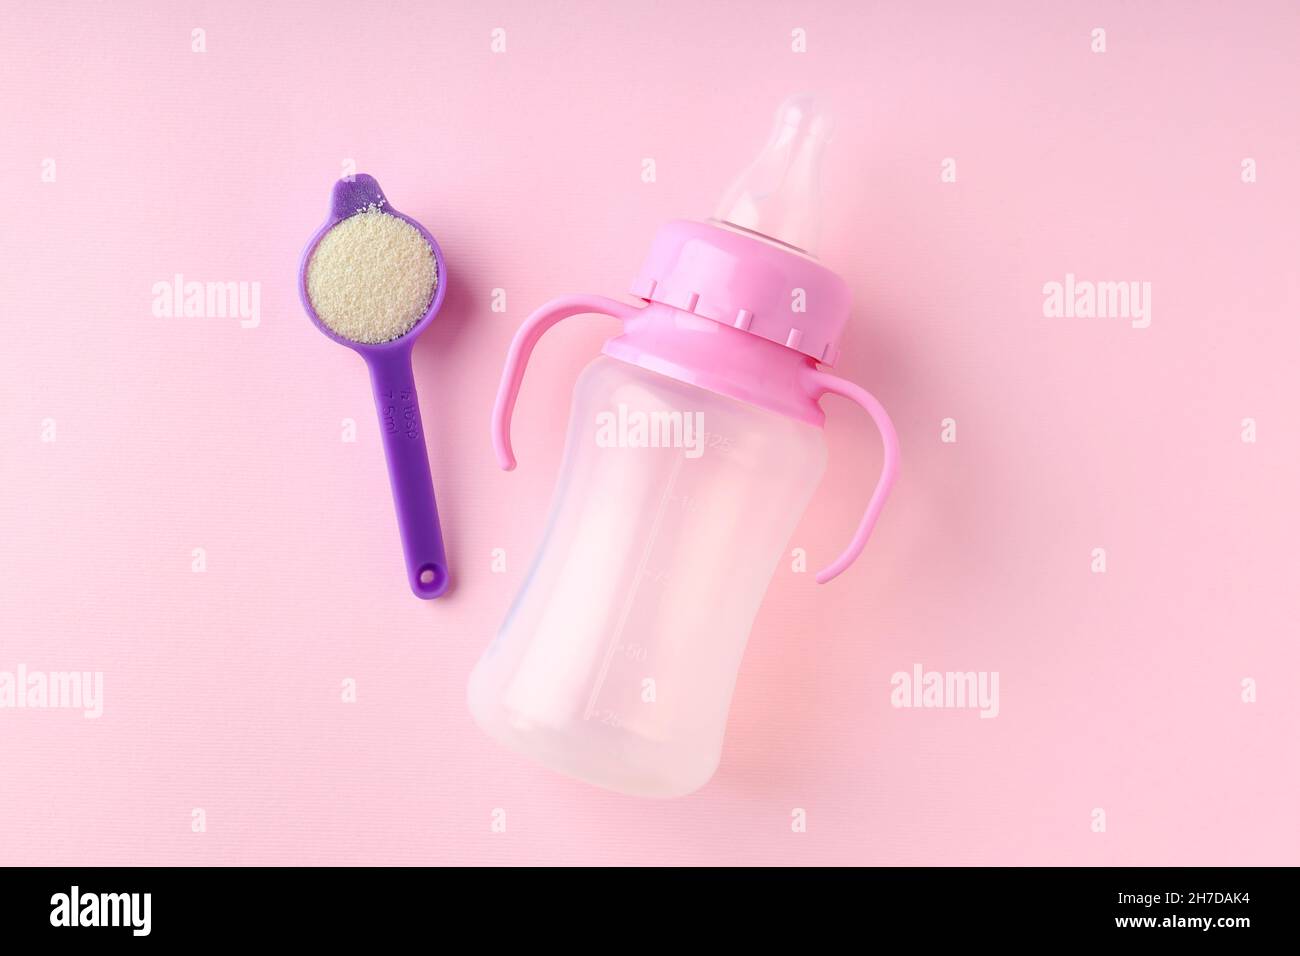 Concept of baby food with рowdered milk on pink background Stock Photo